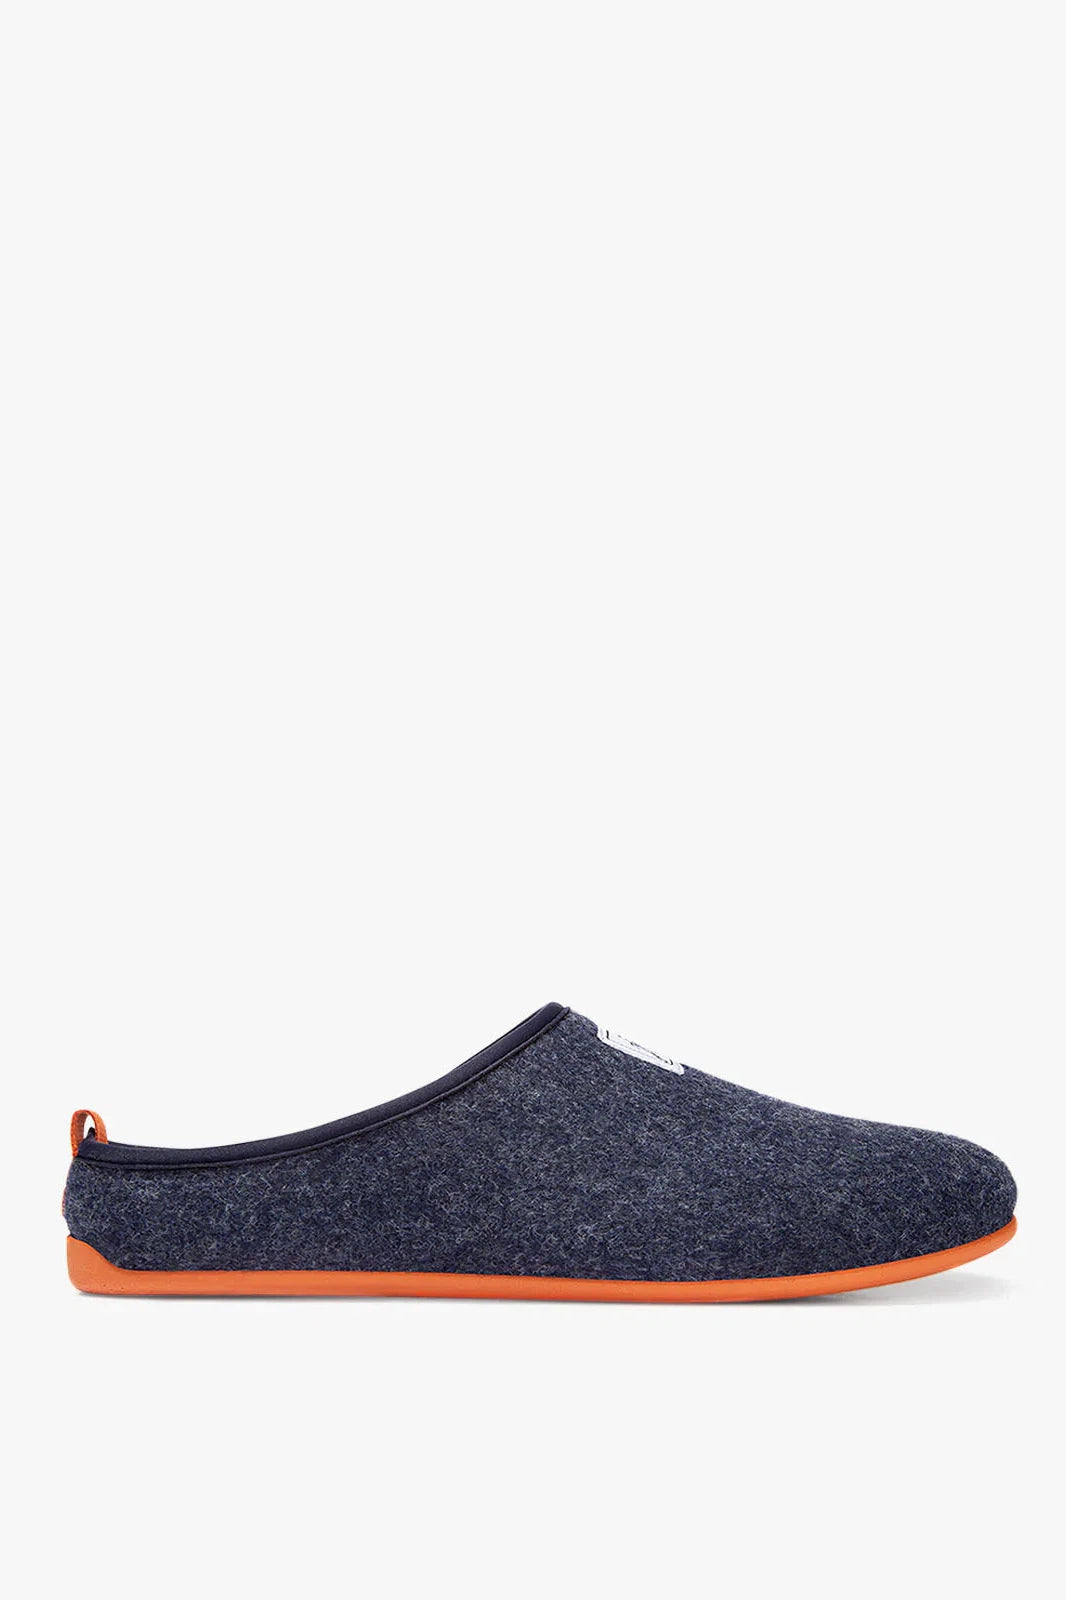 Mecredy Mens Navy / Orange Slippers-Mens-Ohh! By Gum - Shop Sustainable